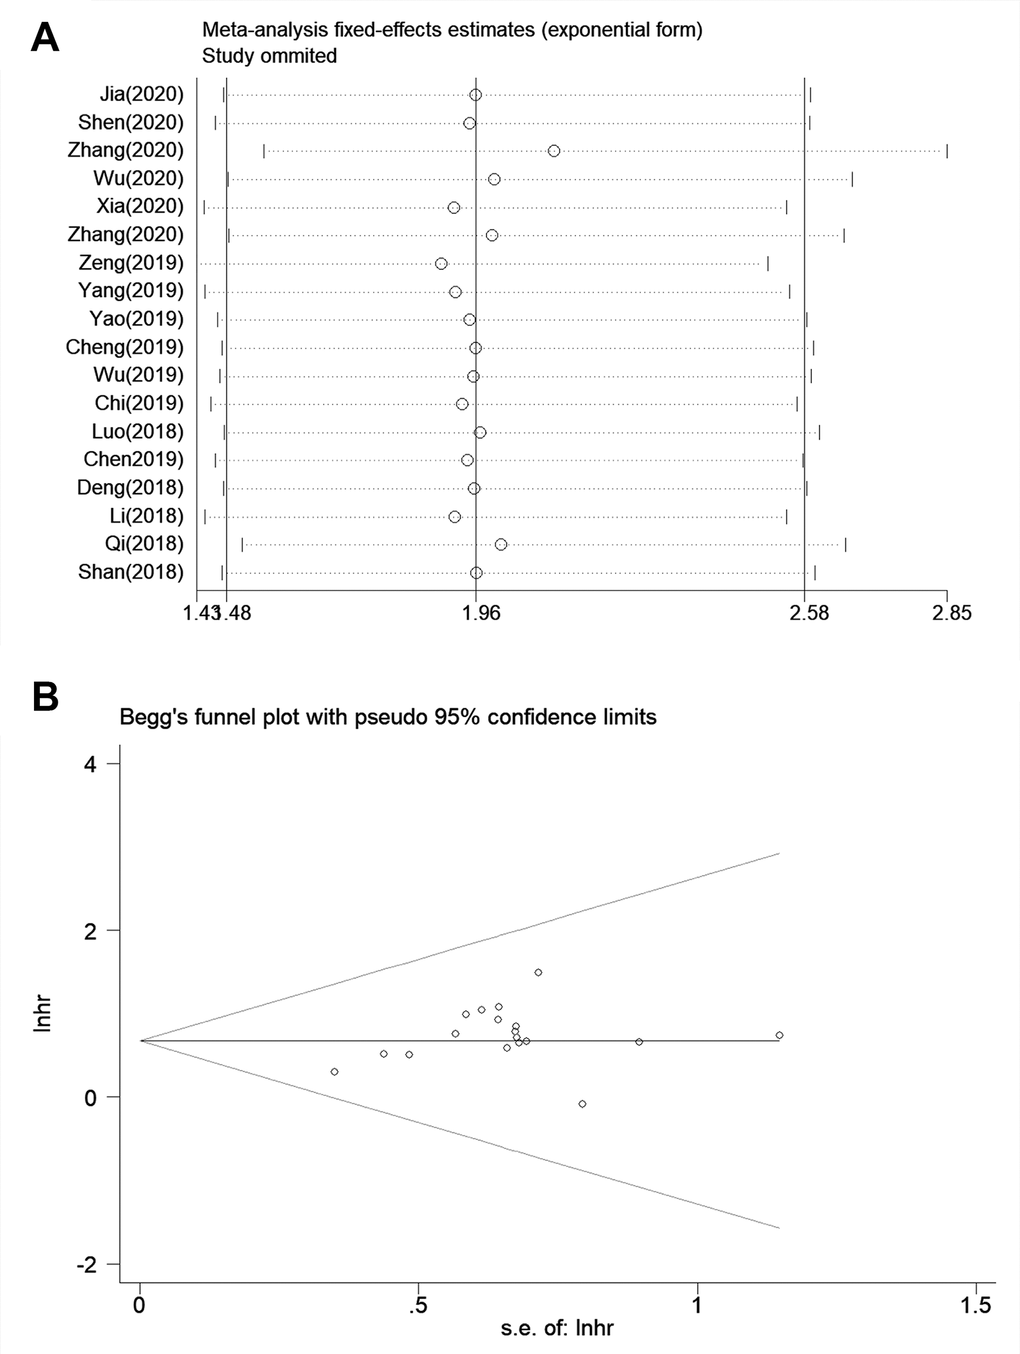 Sensitivity analysis and publication bias for meta-analysis of SNHG7 and OS. (A) Sensitivity analysis for meta-analysis of SNHG7 and OS. (B) Funnel plot of the publication bias for OS.